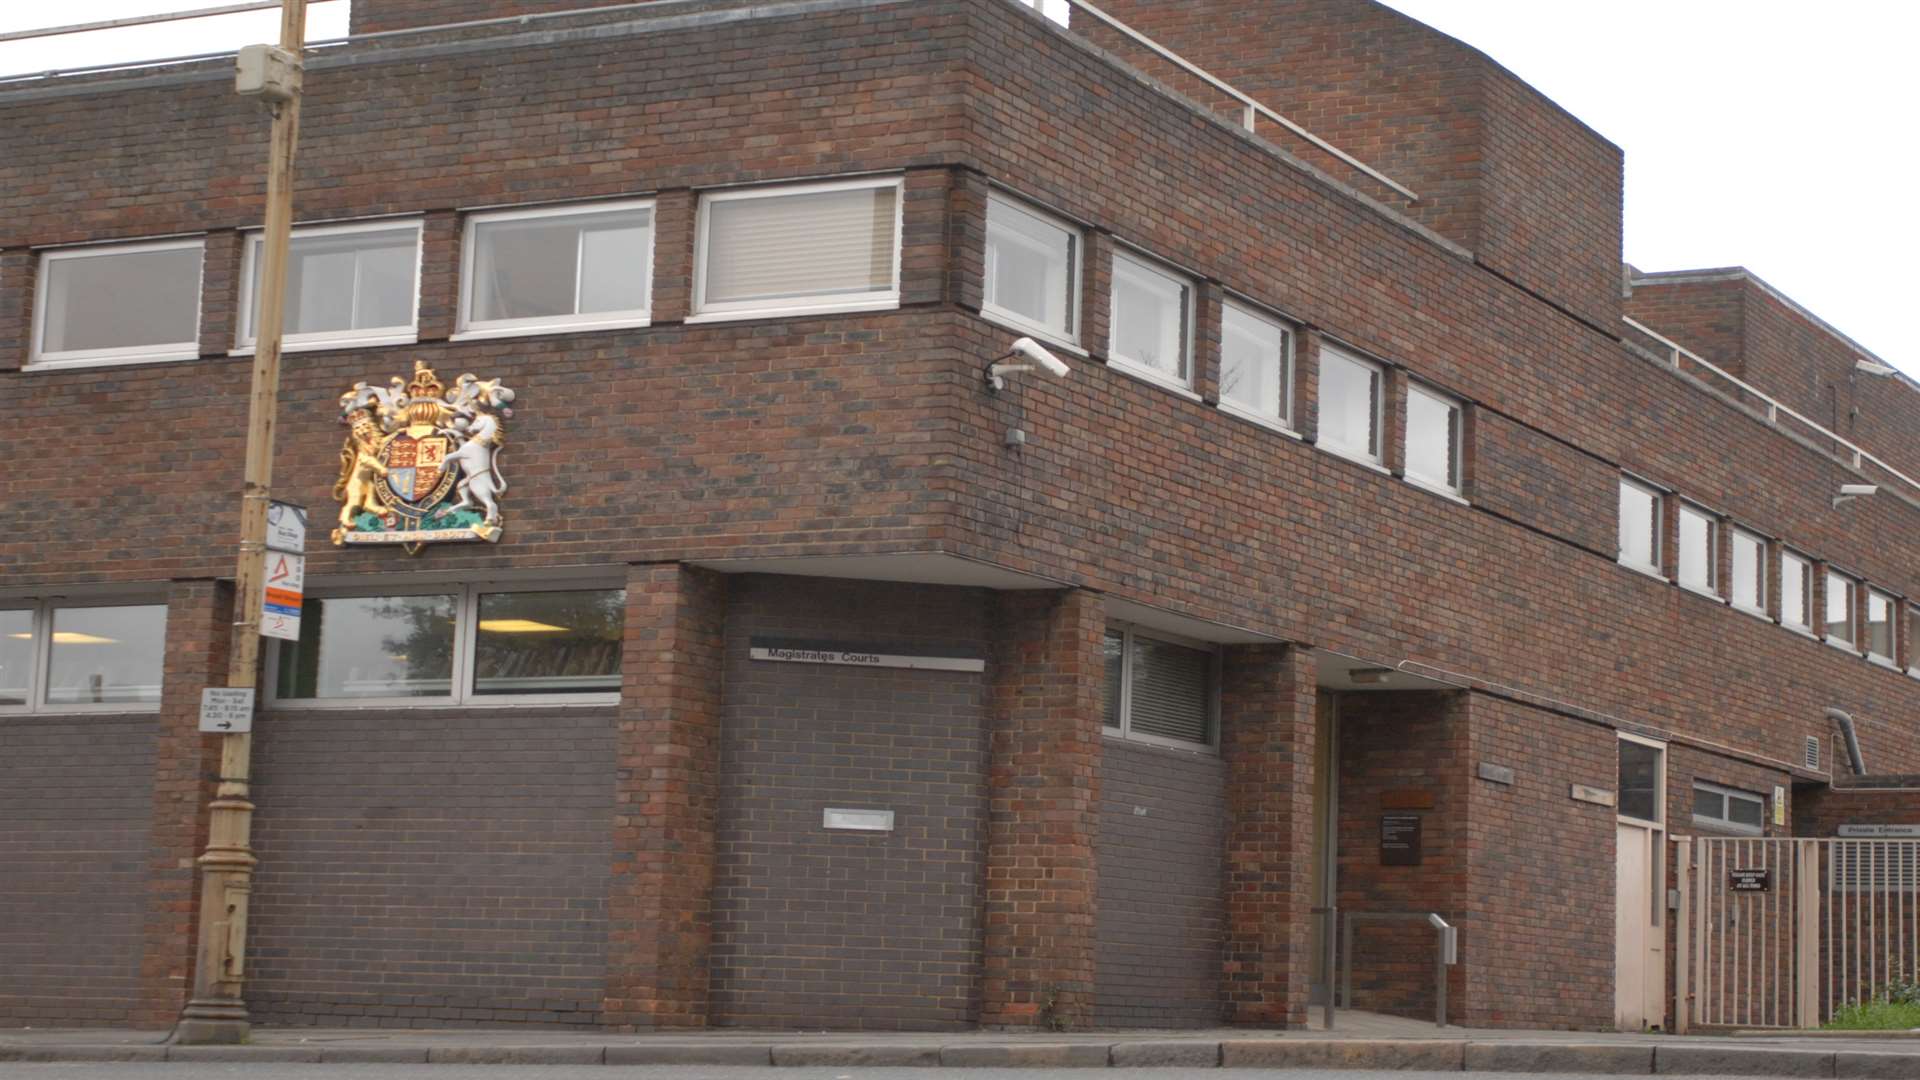 The order was granted at Canterbury Magistrates' Court